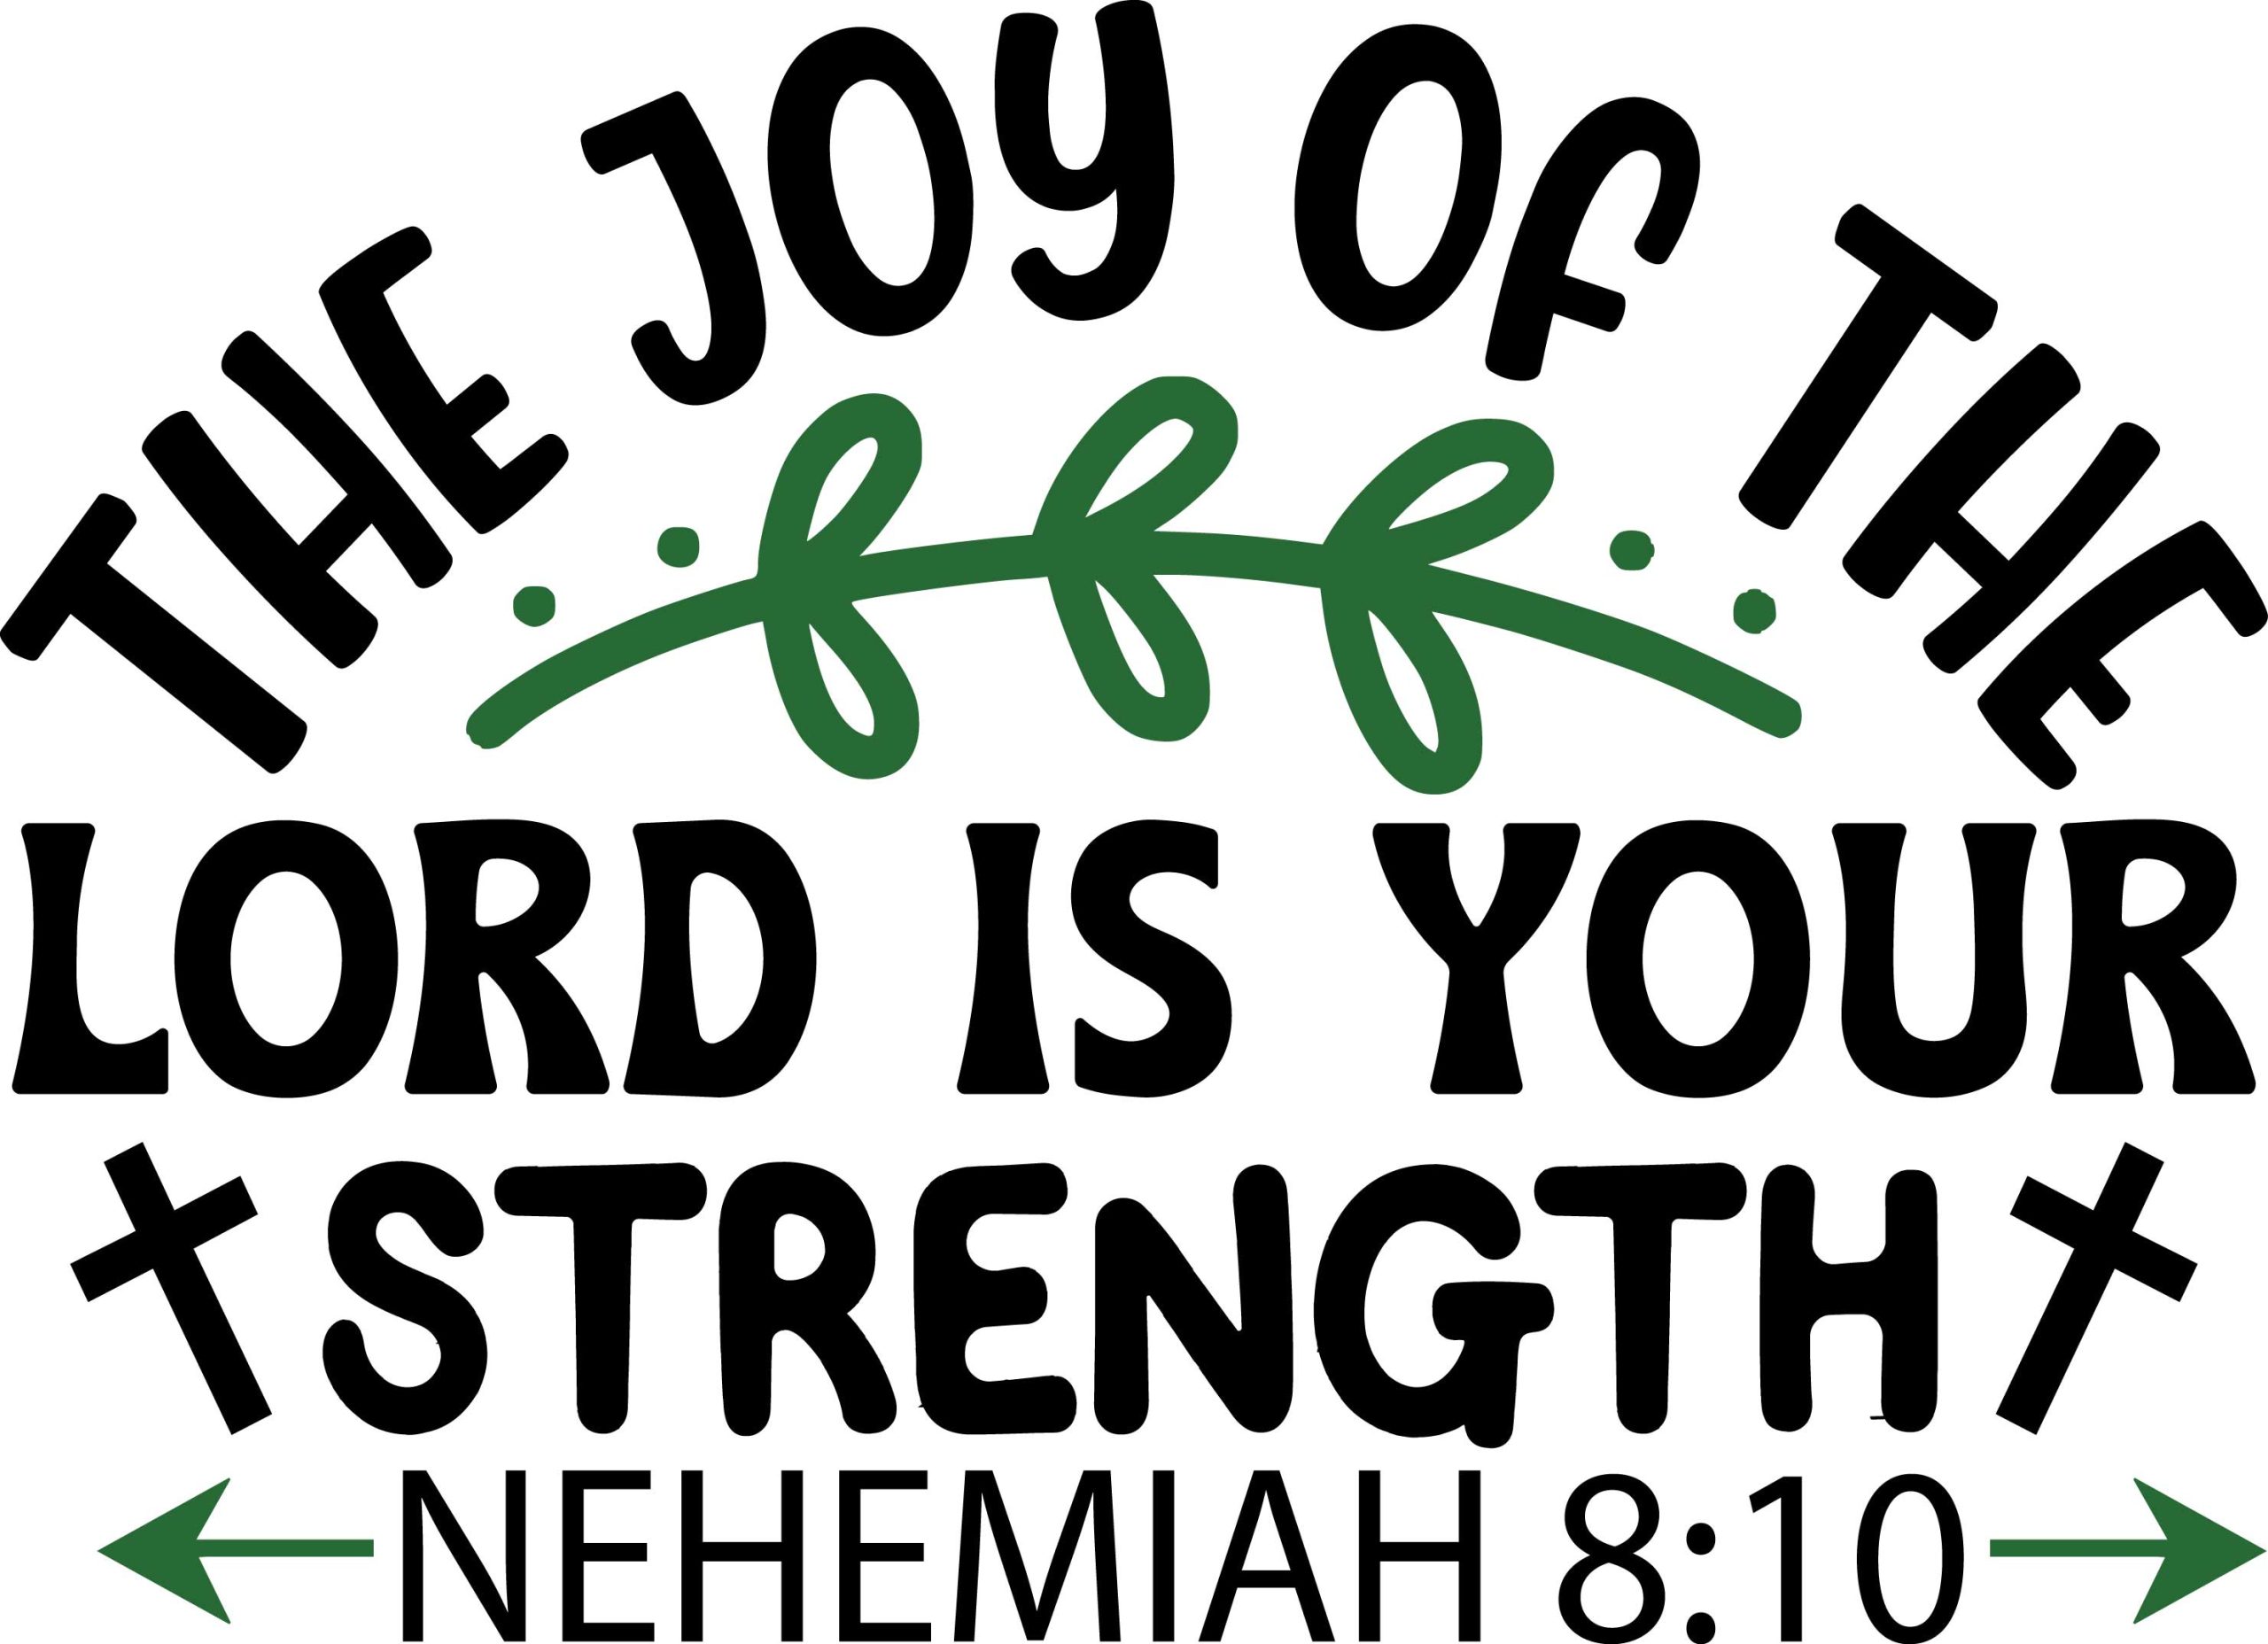 The joy of the lord is your strength Nehemiah 8:10, bible verses, scripture verses, svg files, passages, sayings, cricut designs, silhouette, embroidery, bundle, free cut files, design space, vector